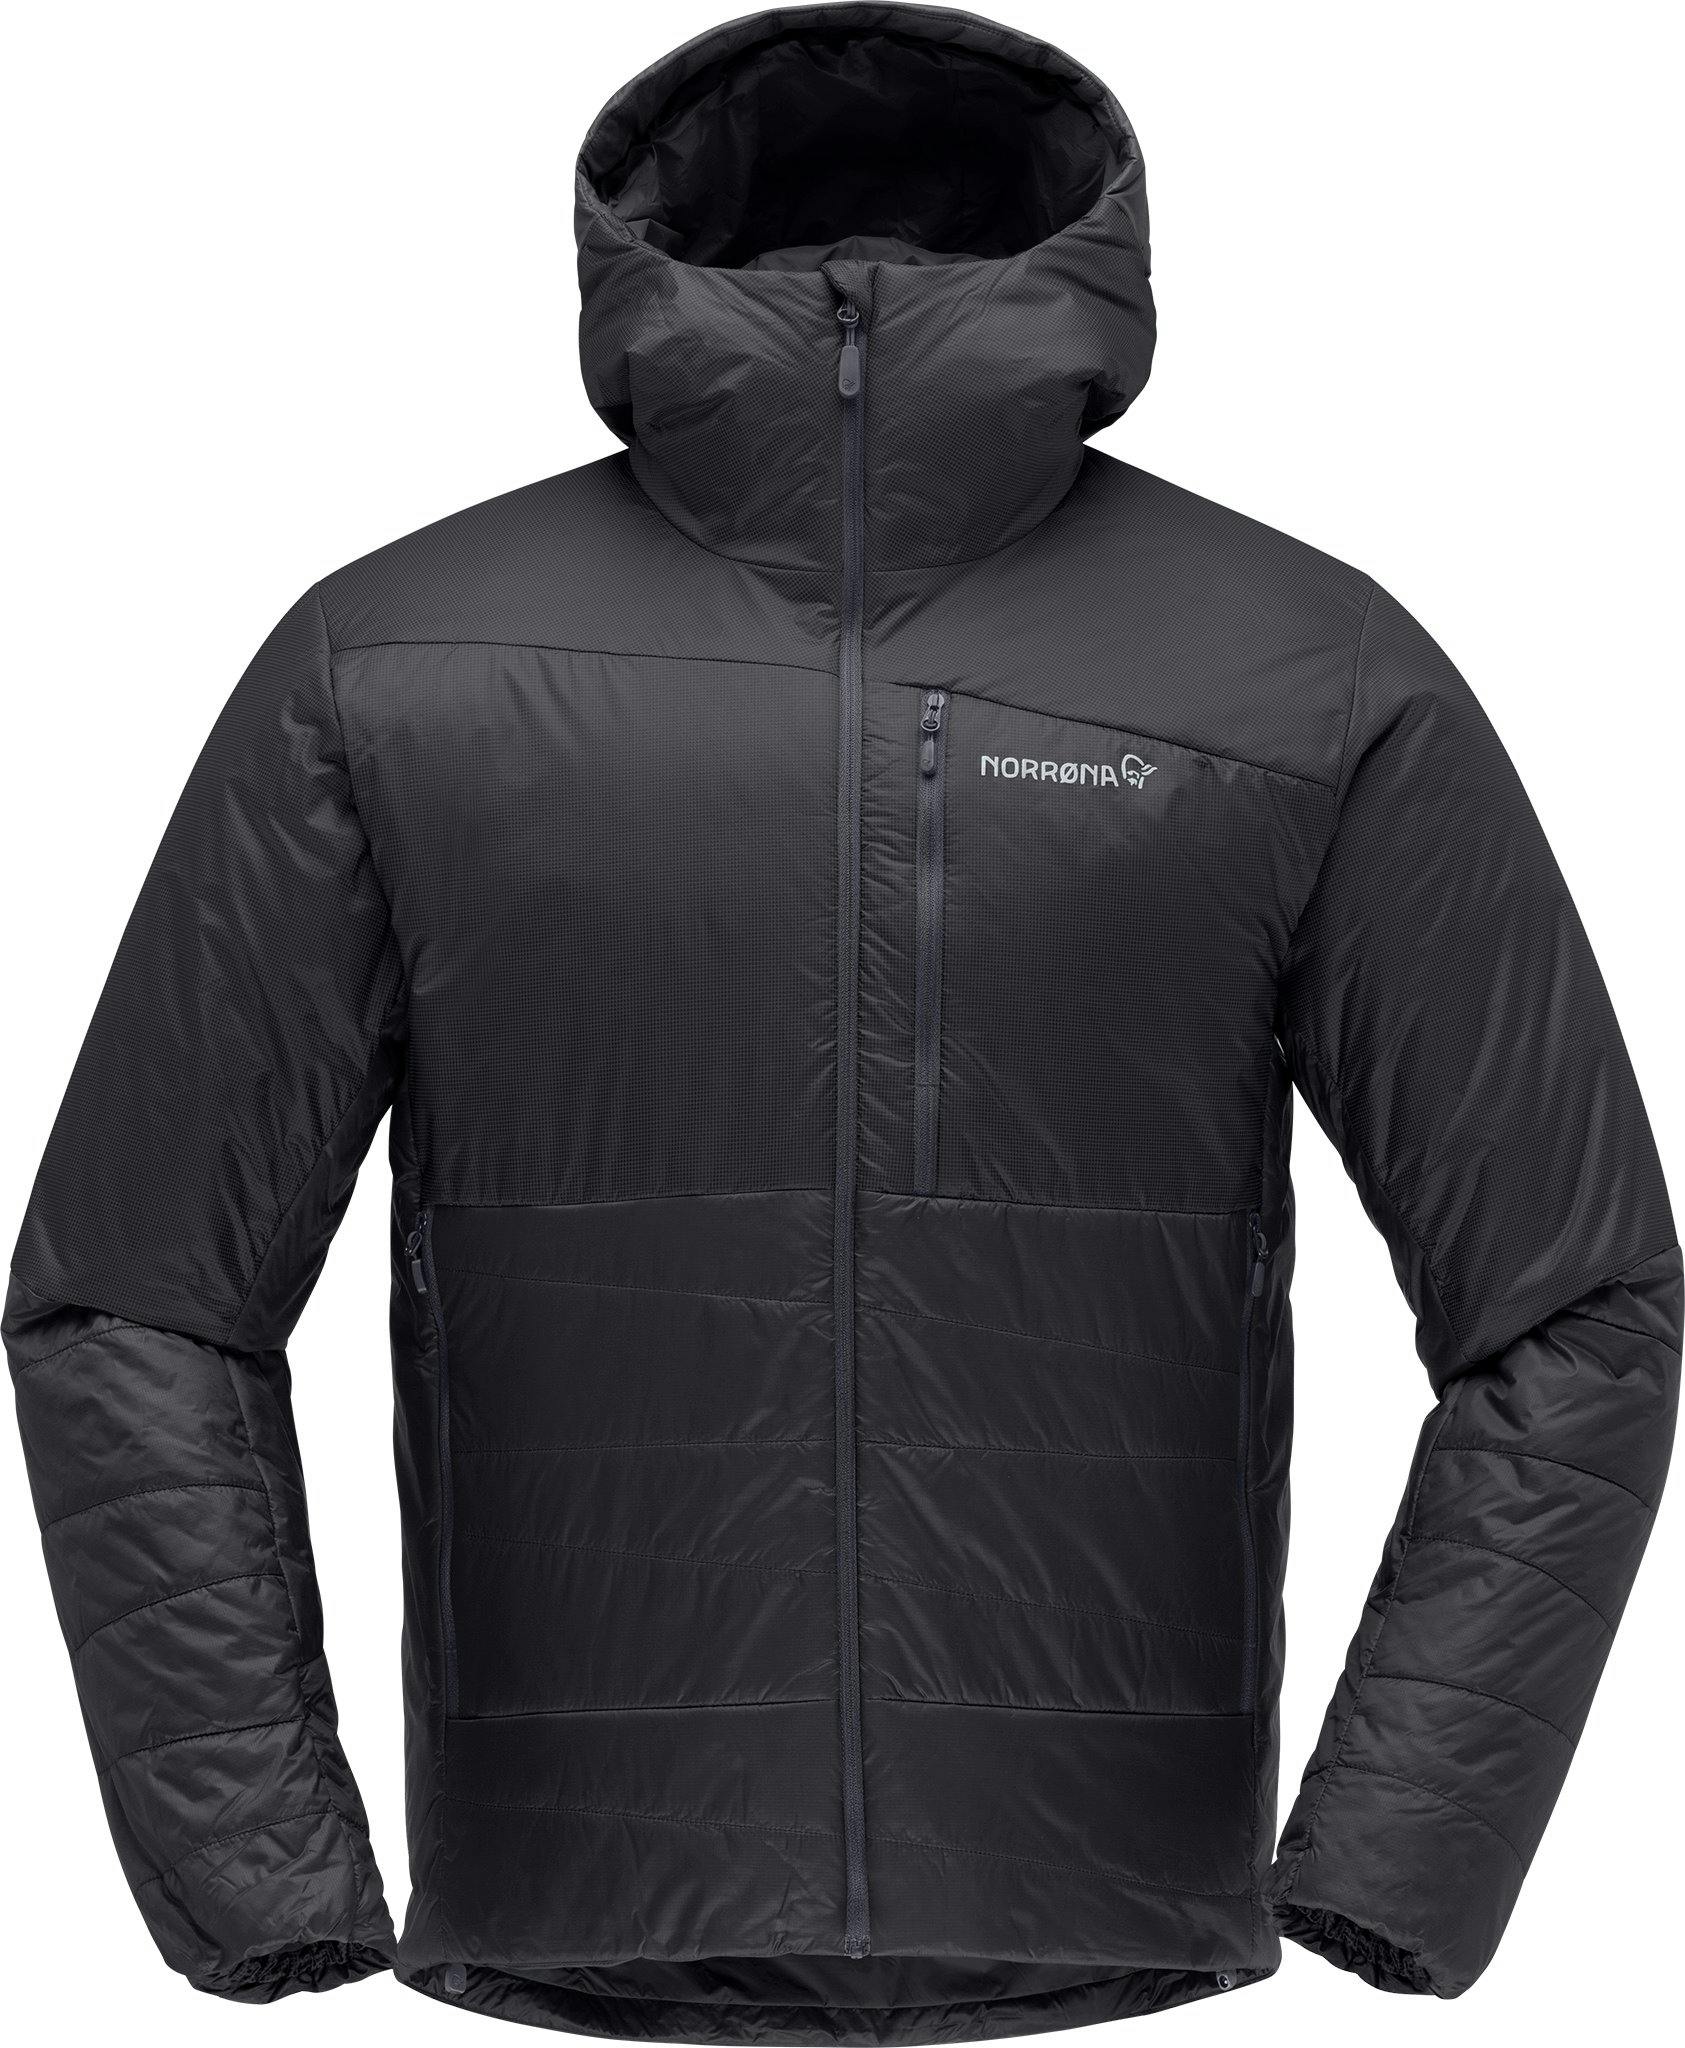 Product image for Falketind Thermo60 Hoody - Men's